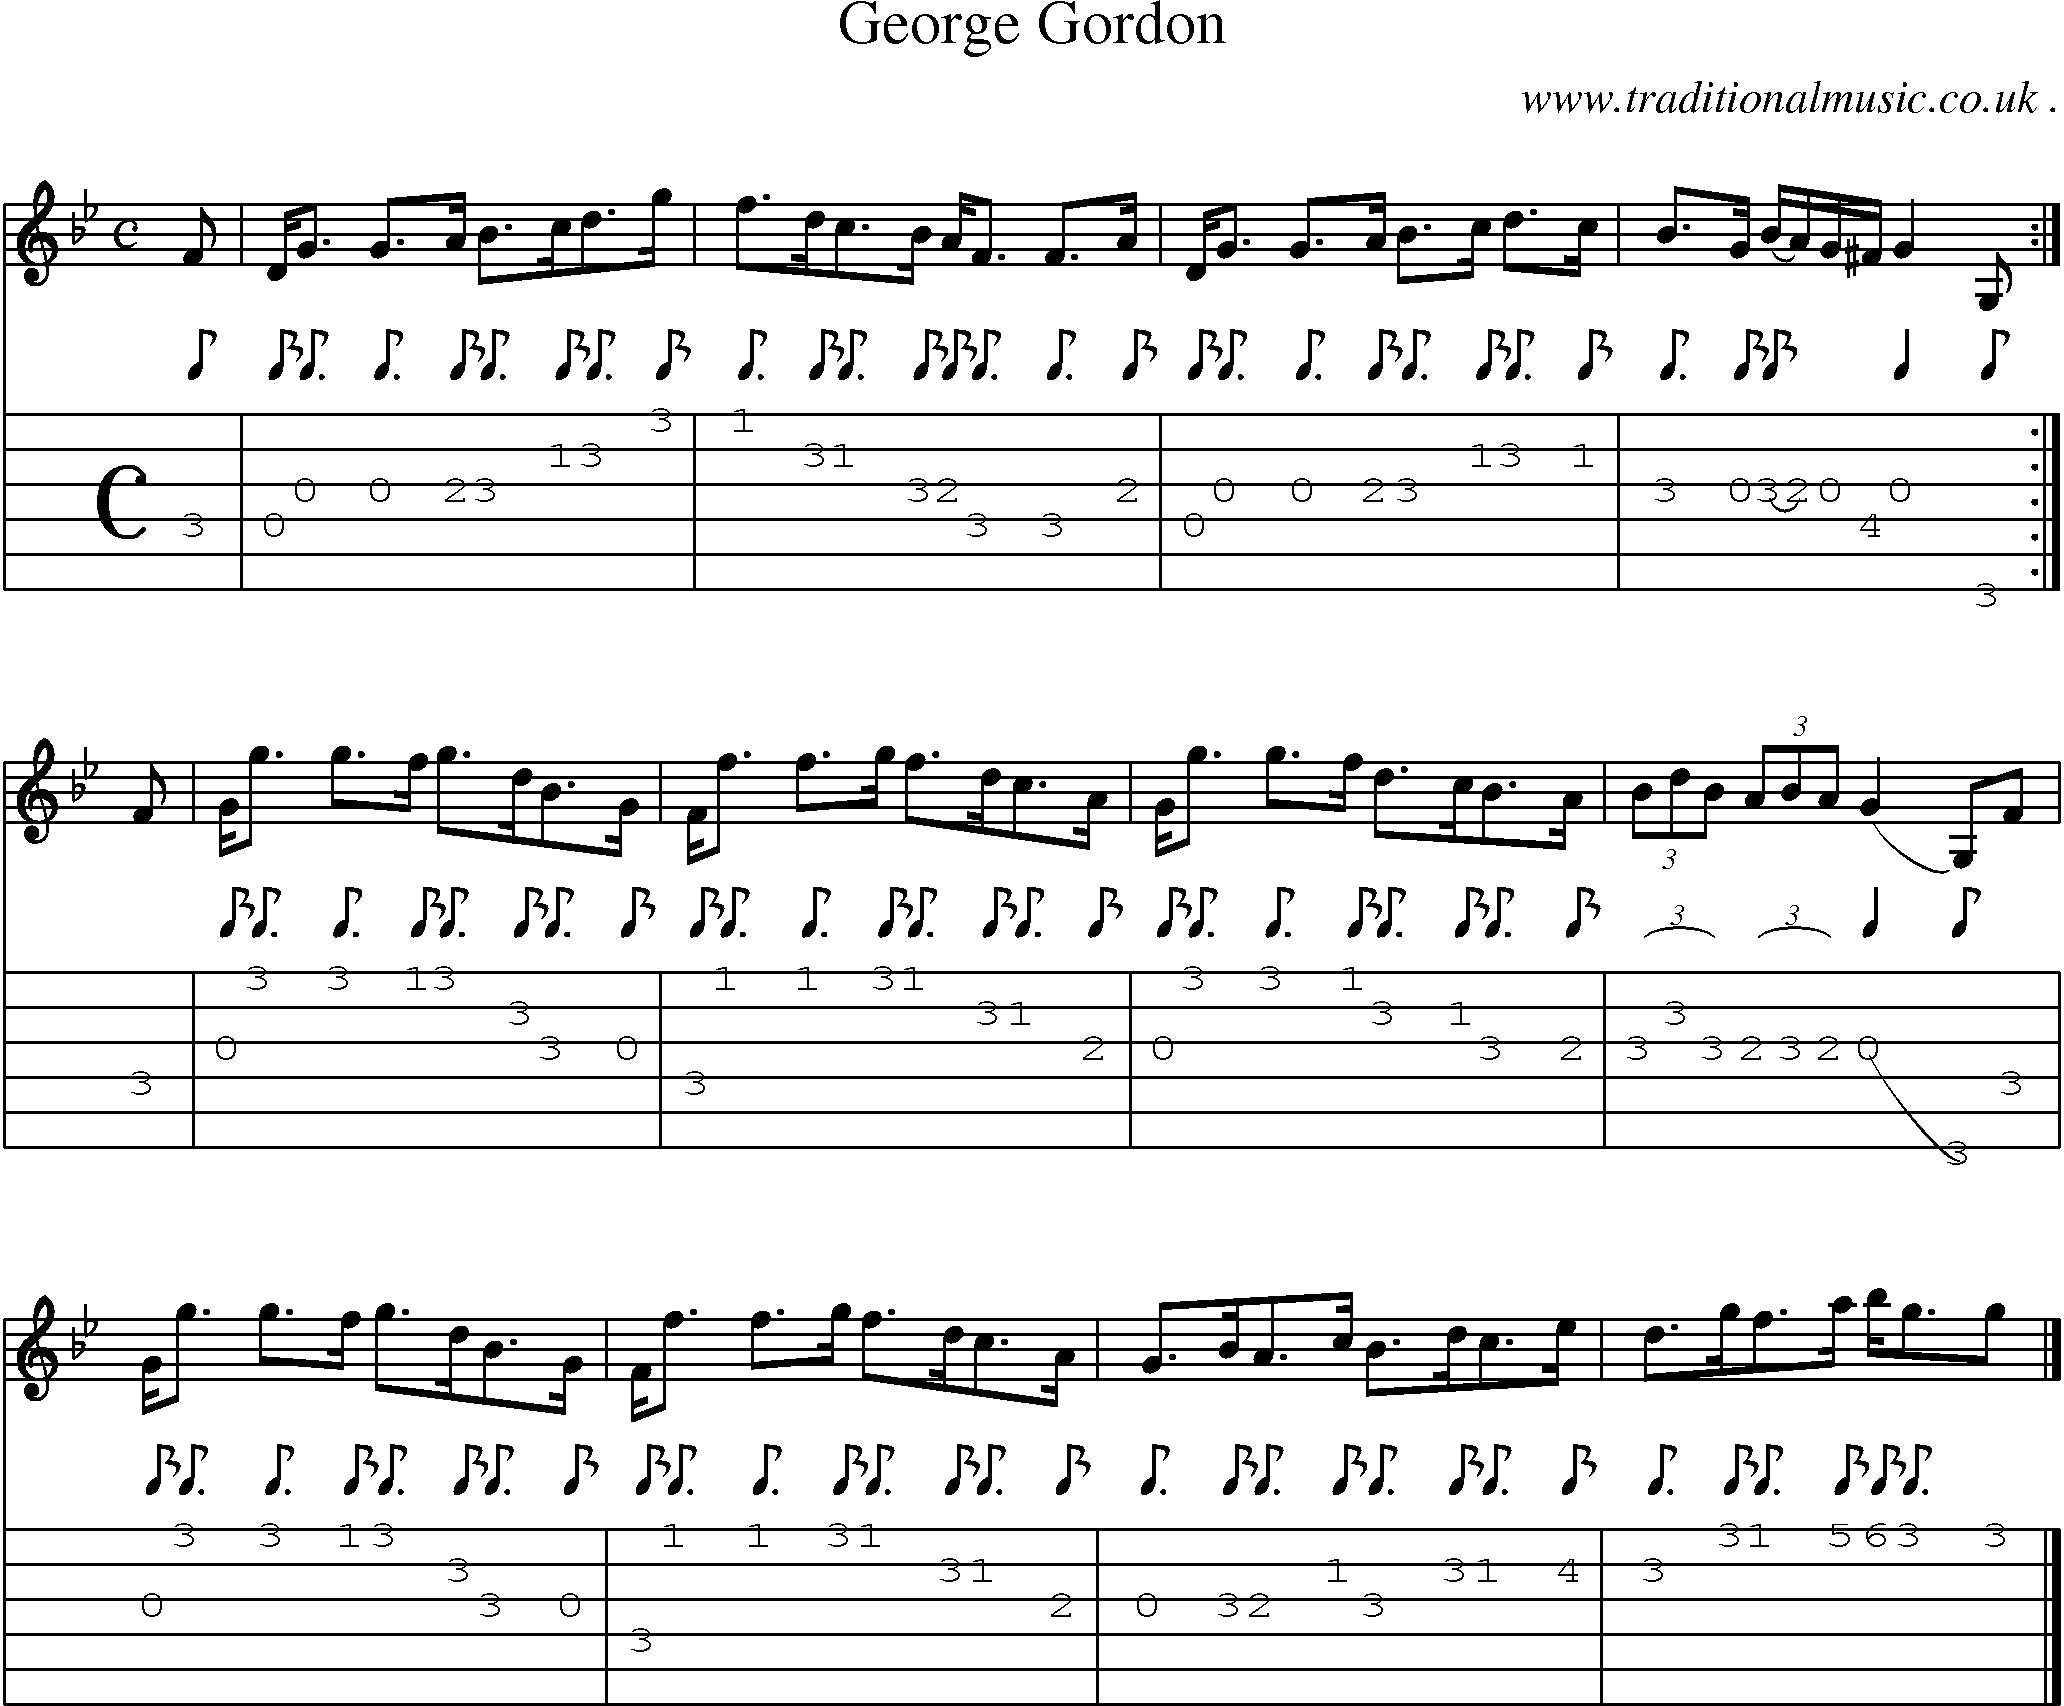 Sheet-music  score, Chords and Guitar Tabs for George Gordon